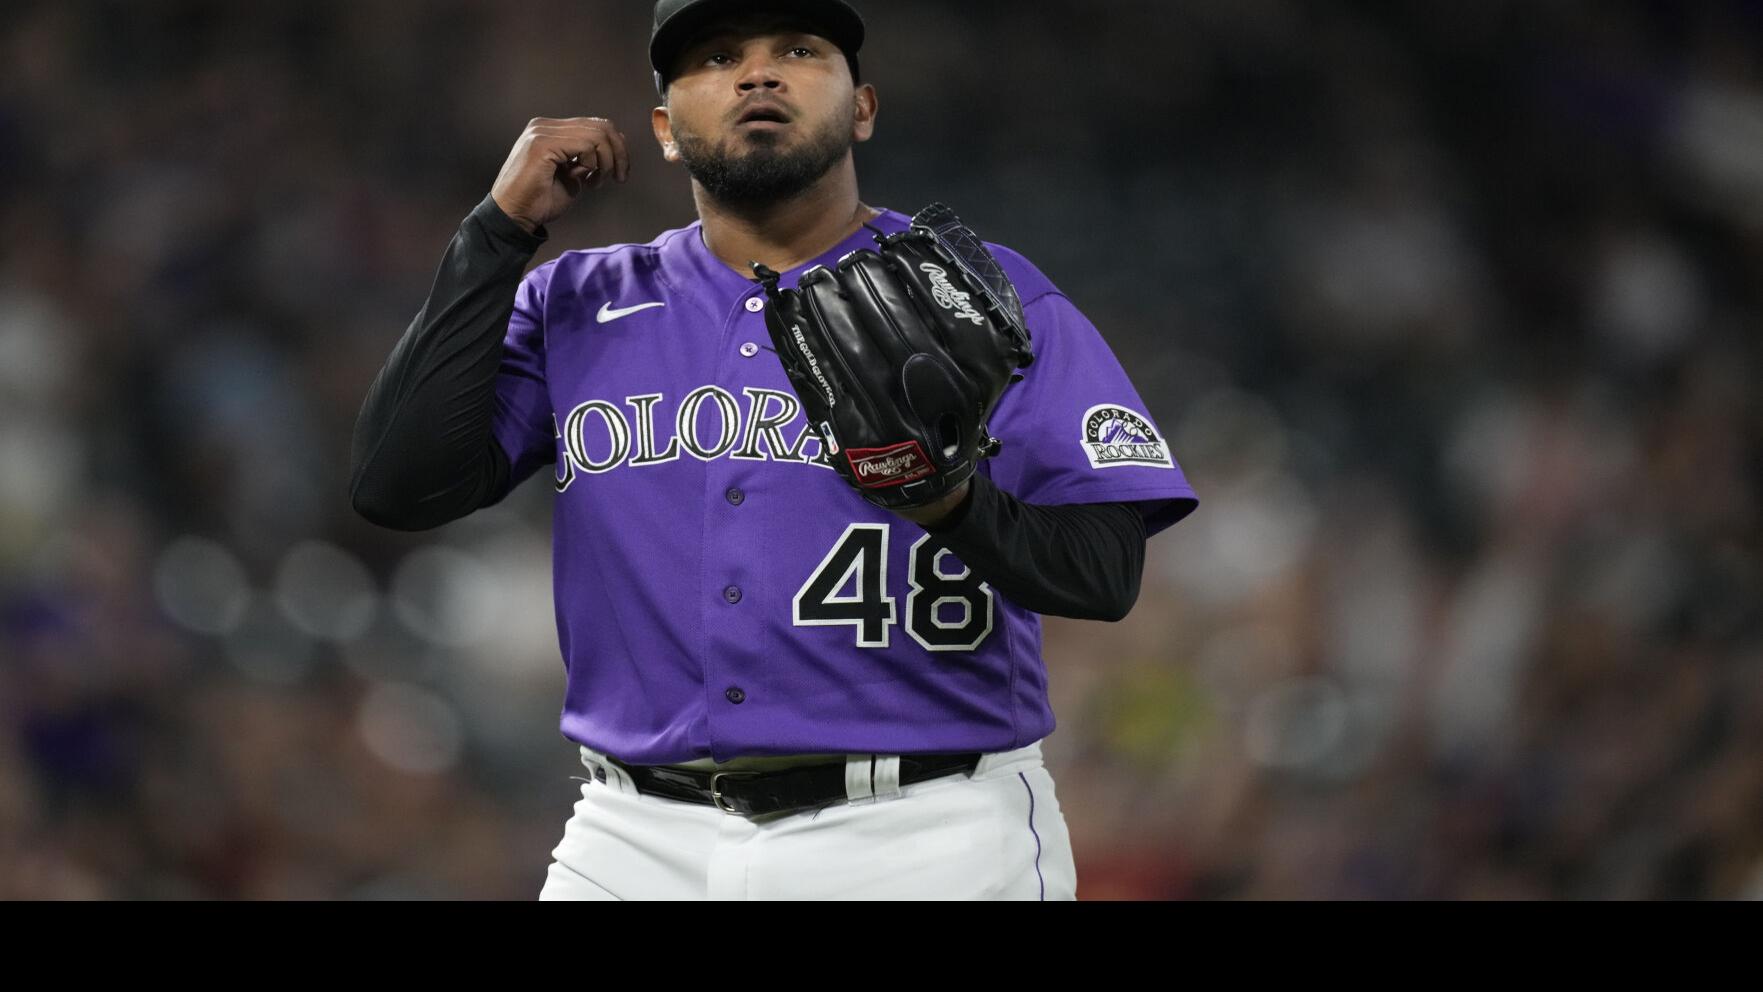 Paul Klee: German Marquez, retired Rockies jersey? The next time